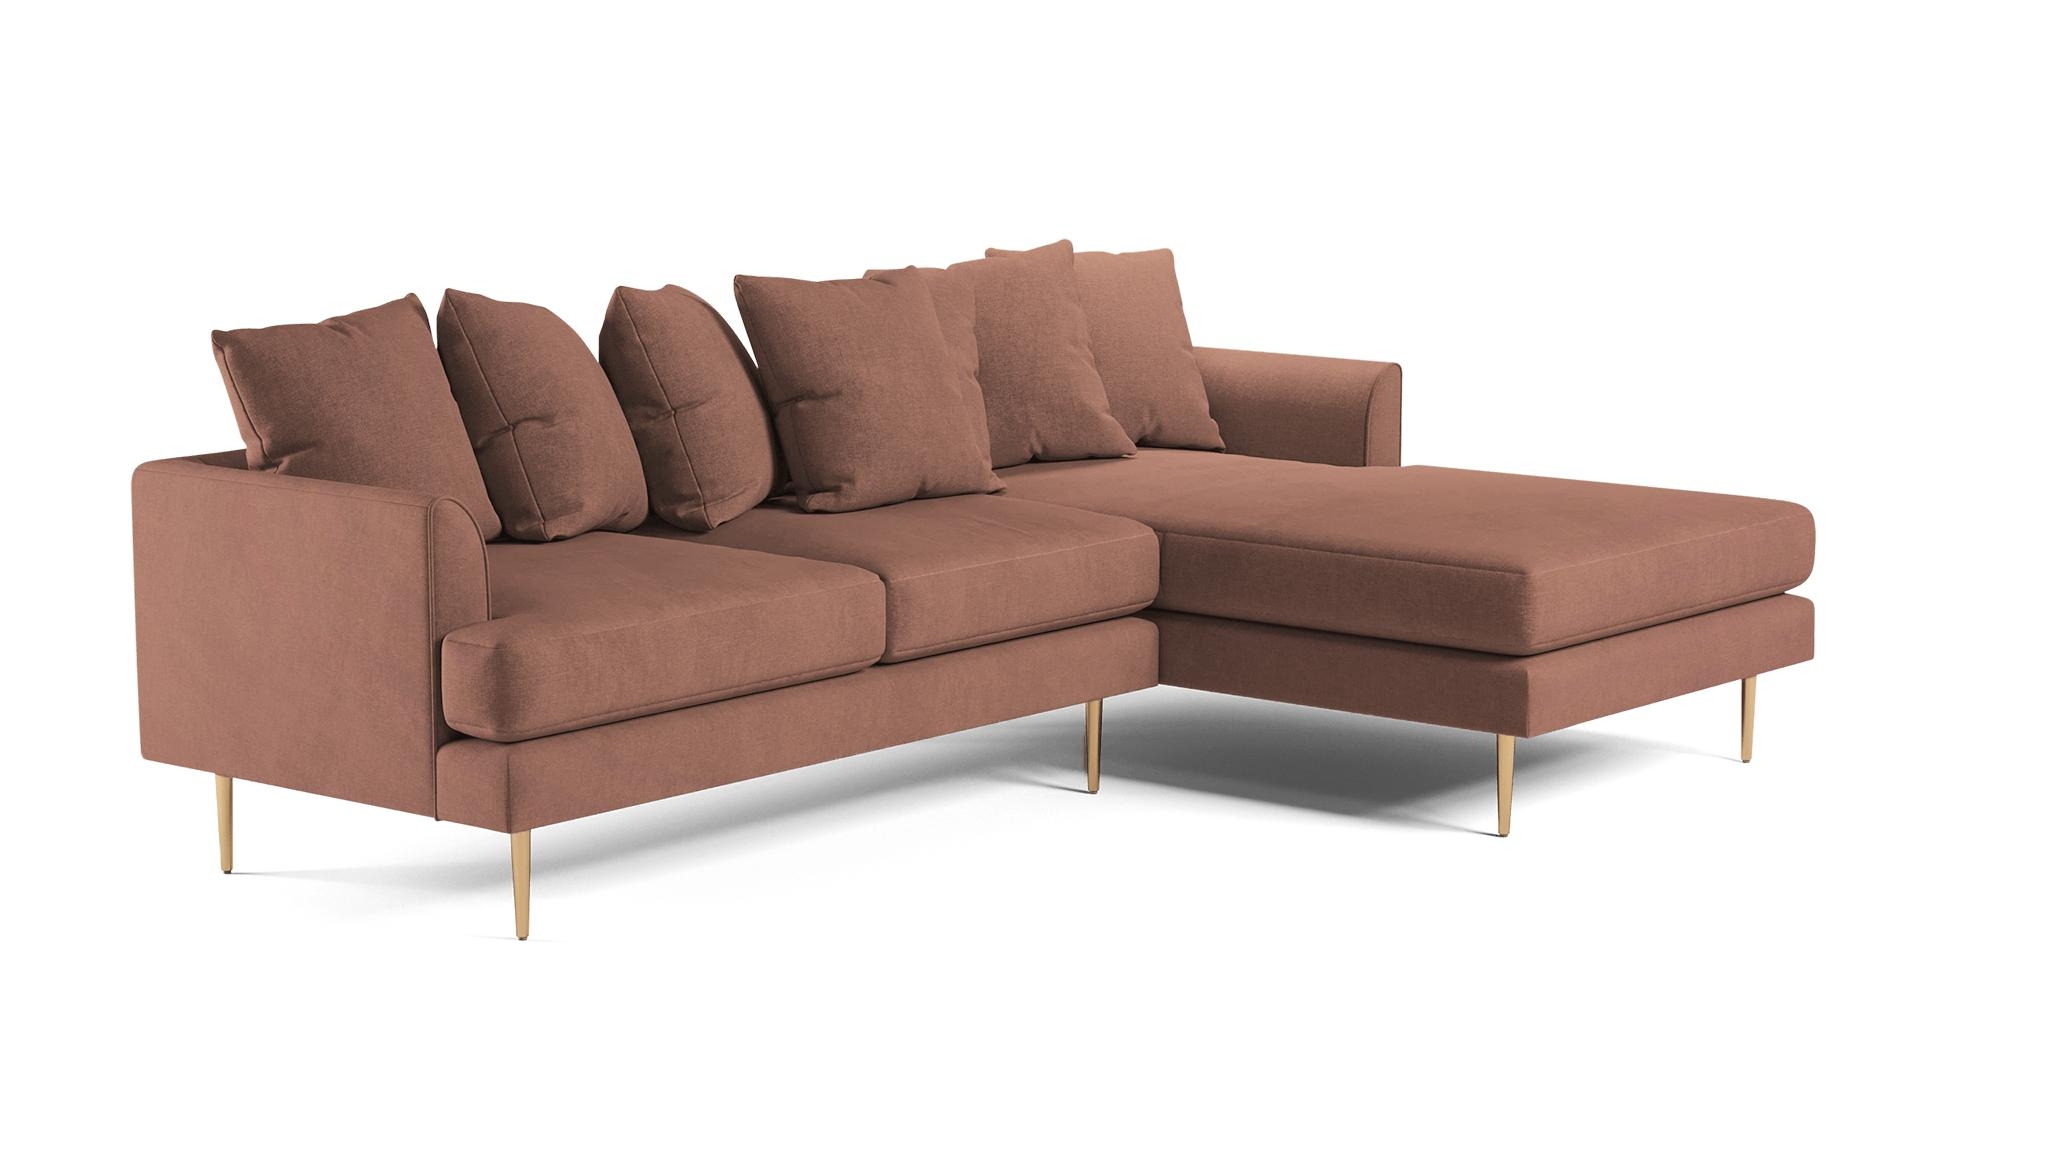 Pink Aime Mid Century Modern Sectional - Kenley Mauve - Left - Image 1